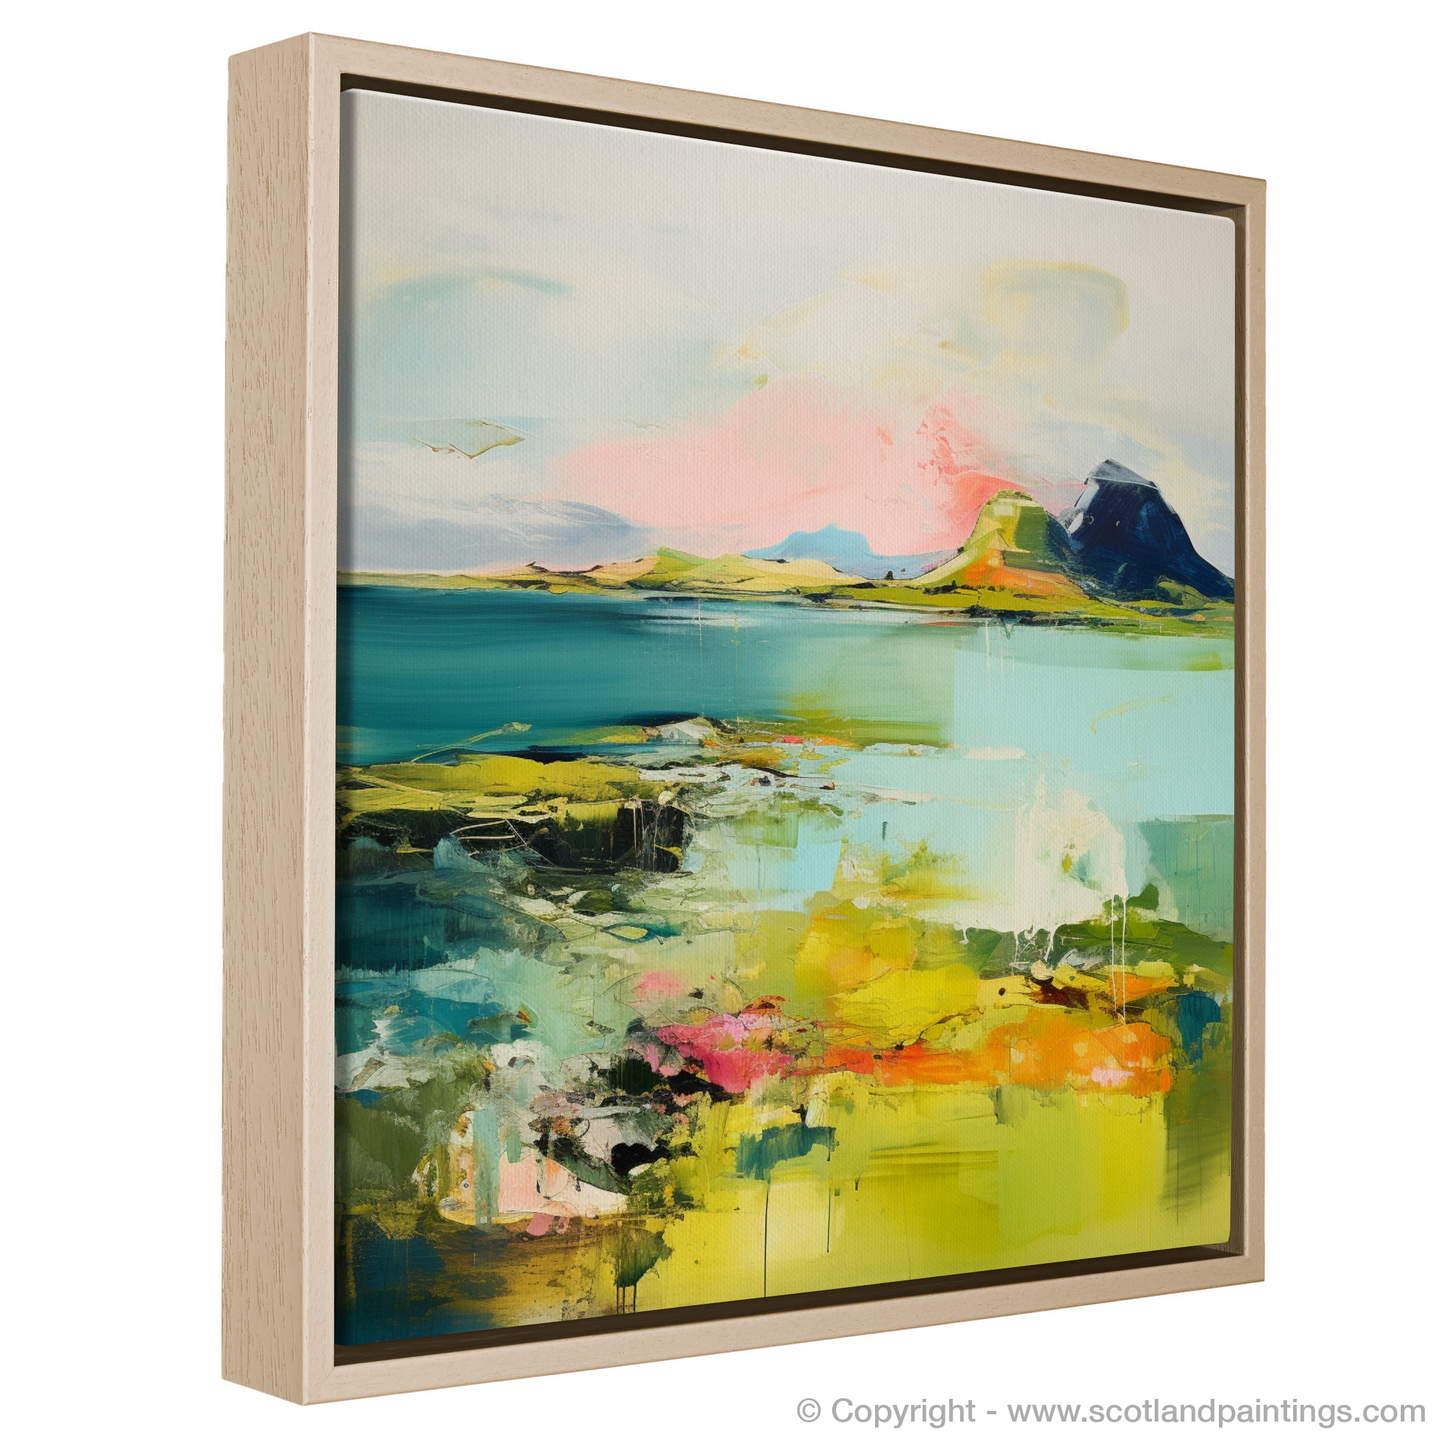 Painting and Art Print of Isle of Raasay, Inner Hebrides in summer entitled "Summer Essence of Raasay".